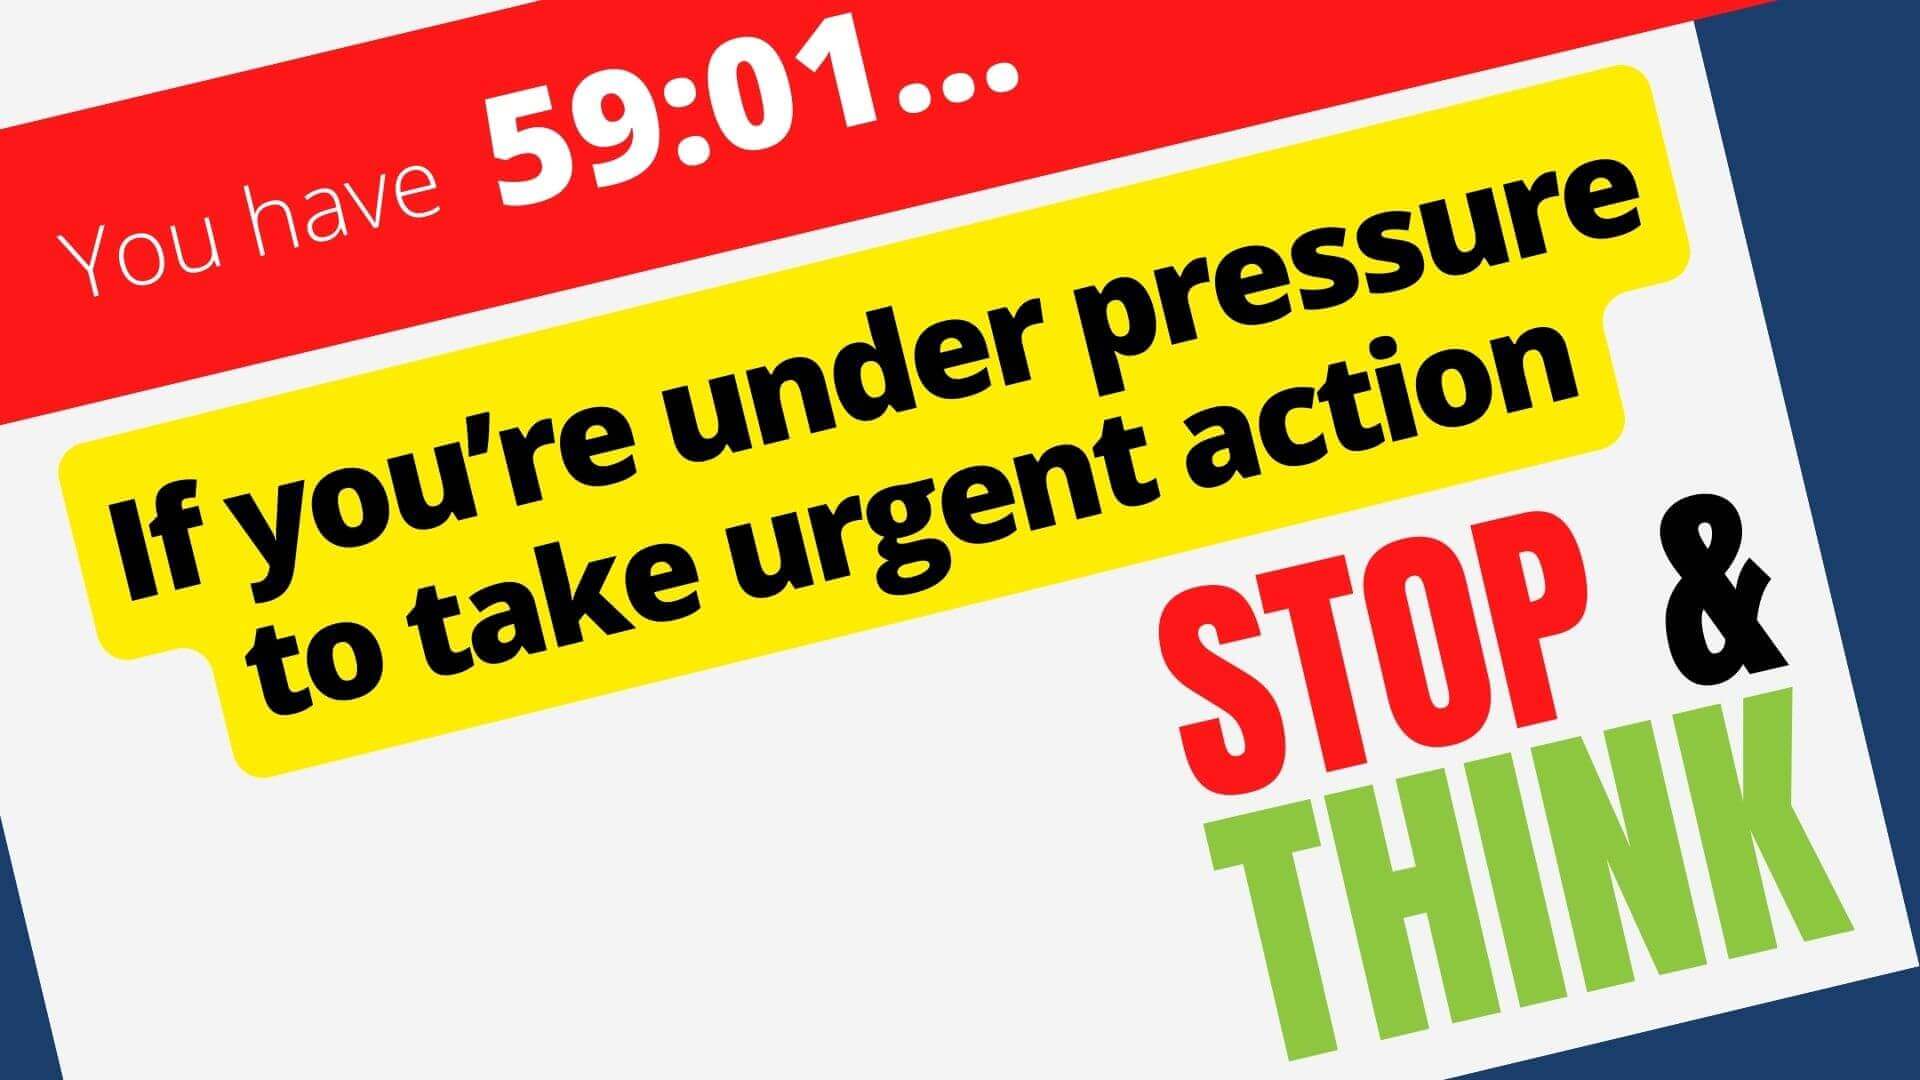 If you’re under pressure to take urgent action - stop and think